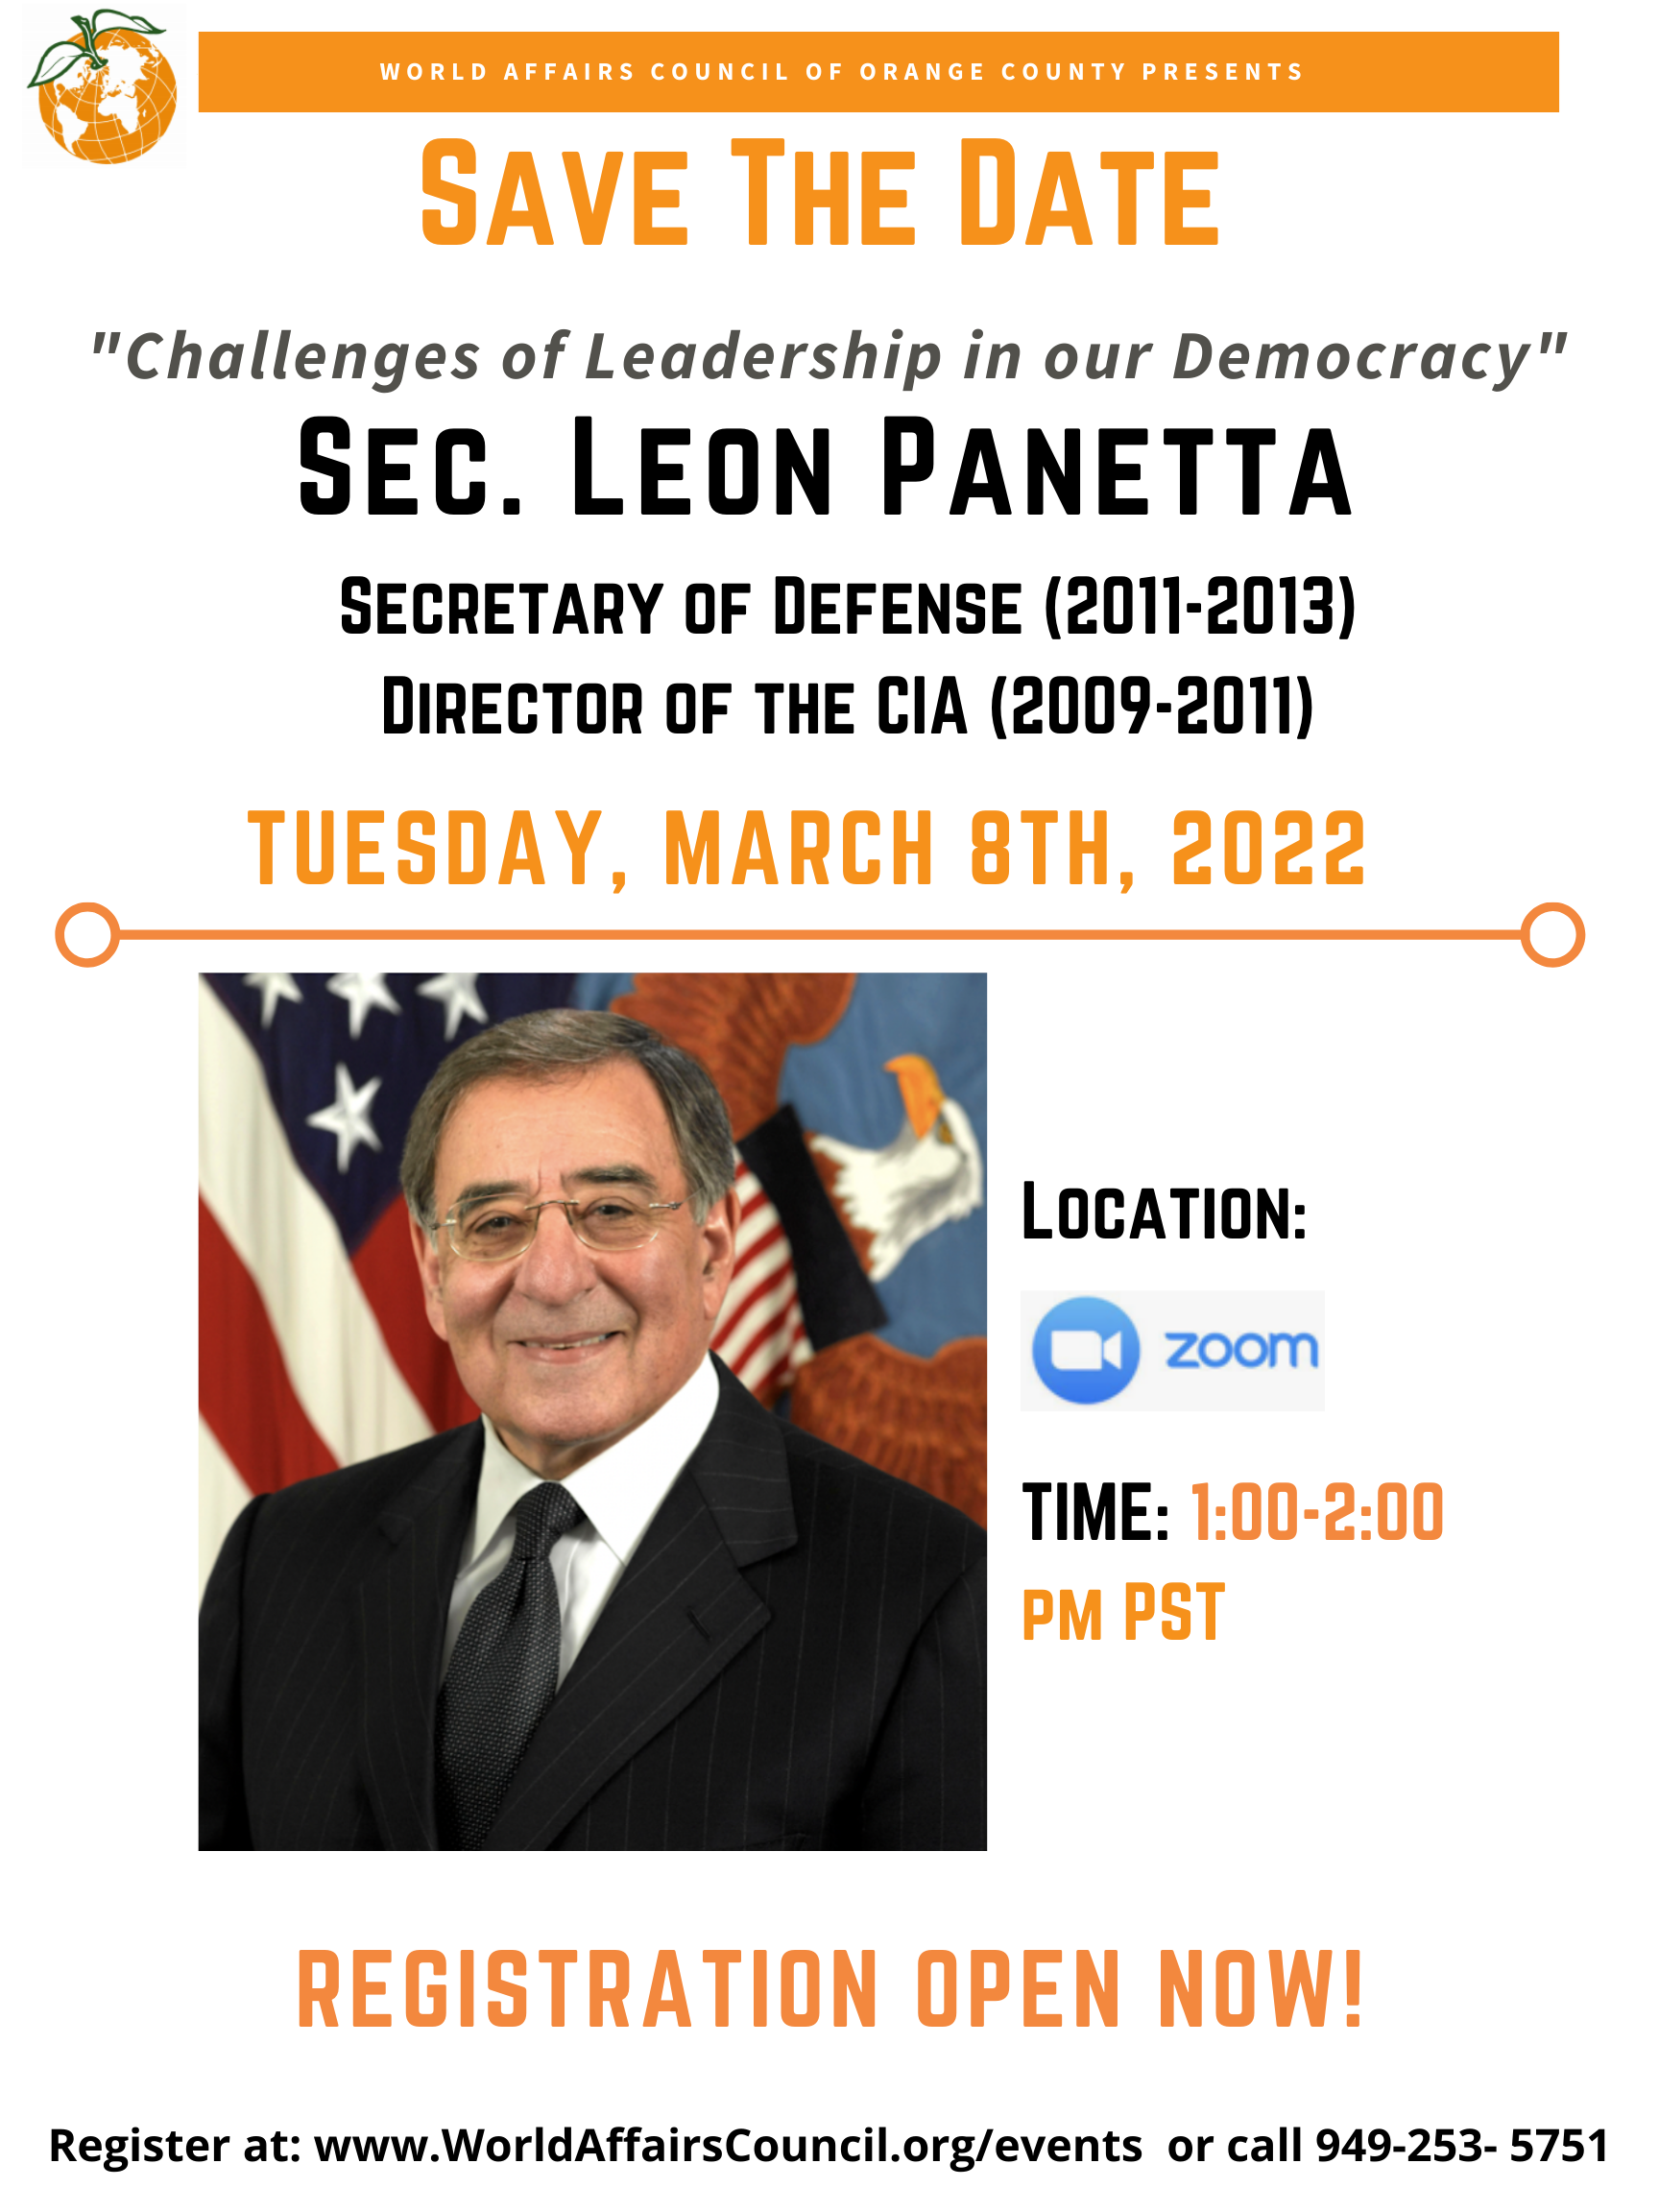 "Challenges of Leadership in Our Democracy" with Former Secretary of Defense Leon Panetta